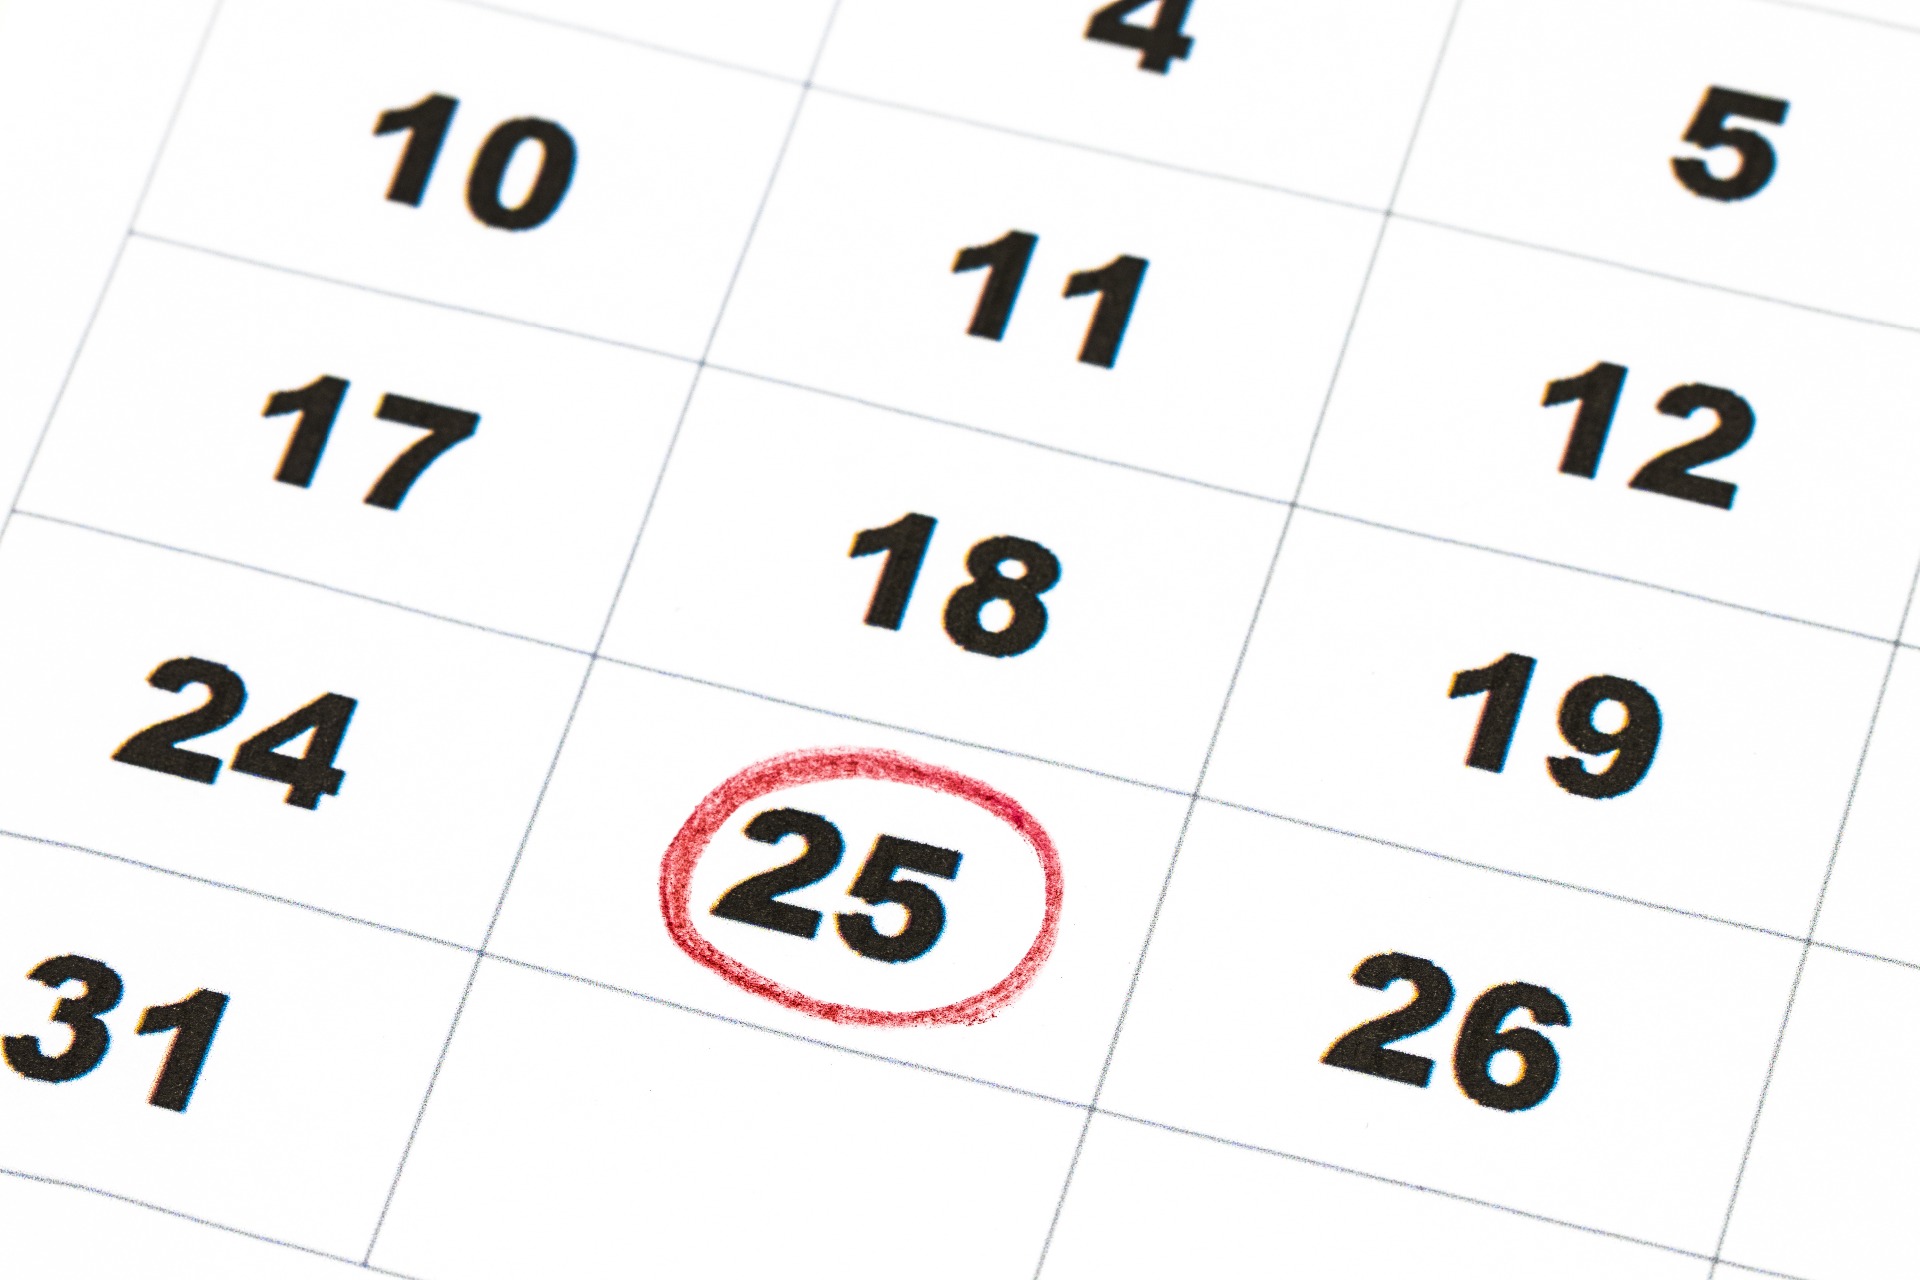 Calendar showing the 25th Day of the month encircled as the property completion date